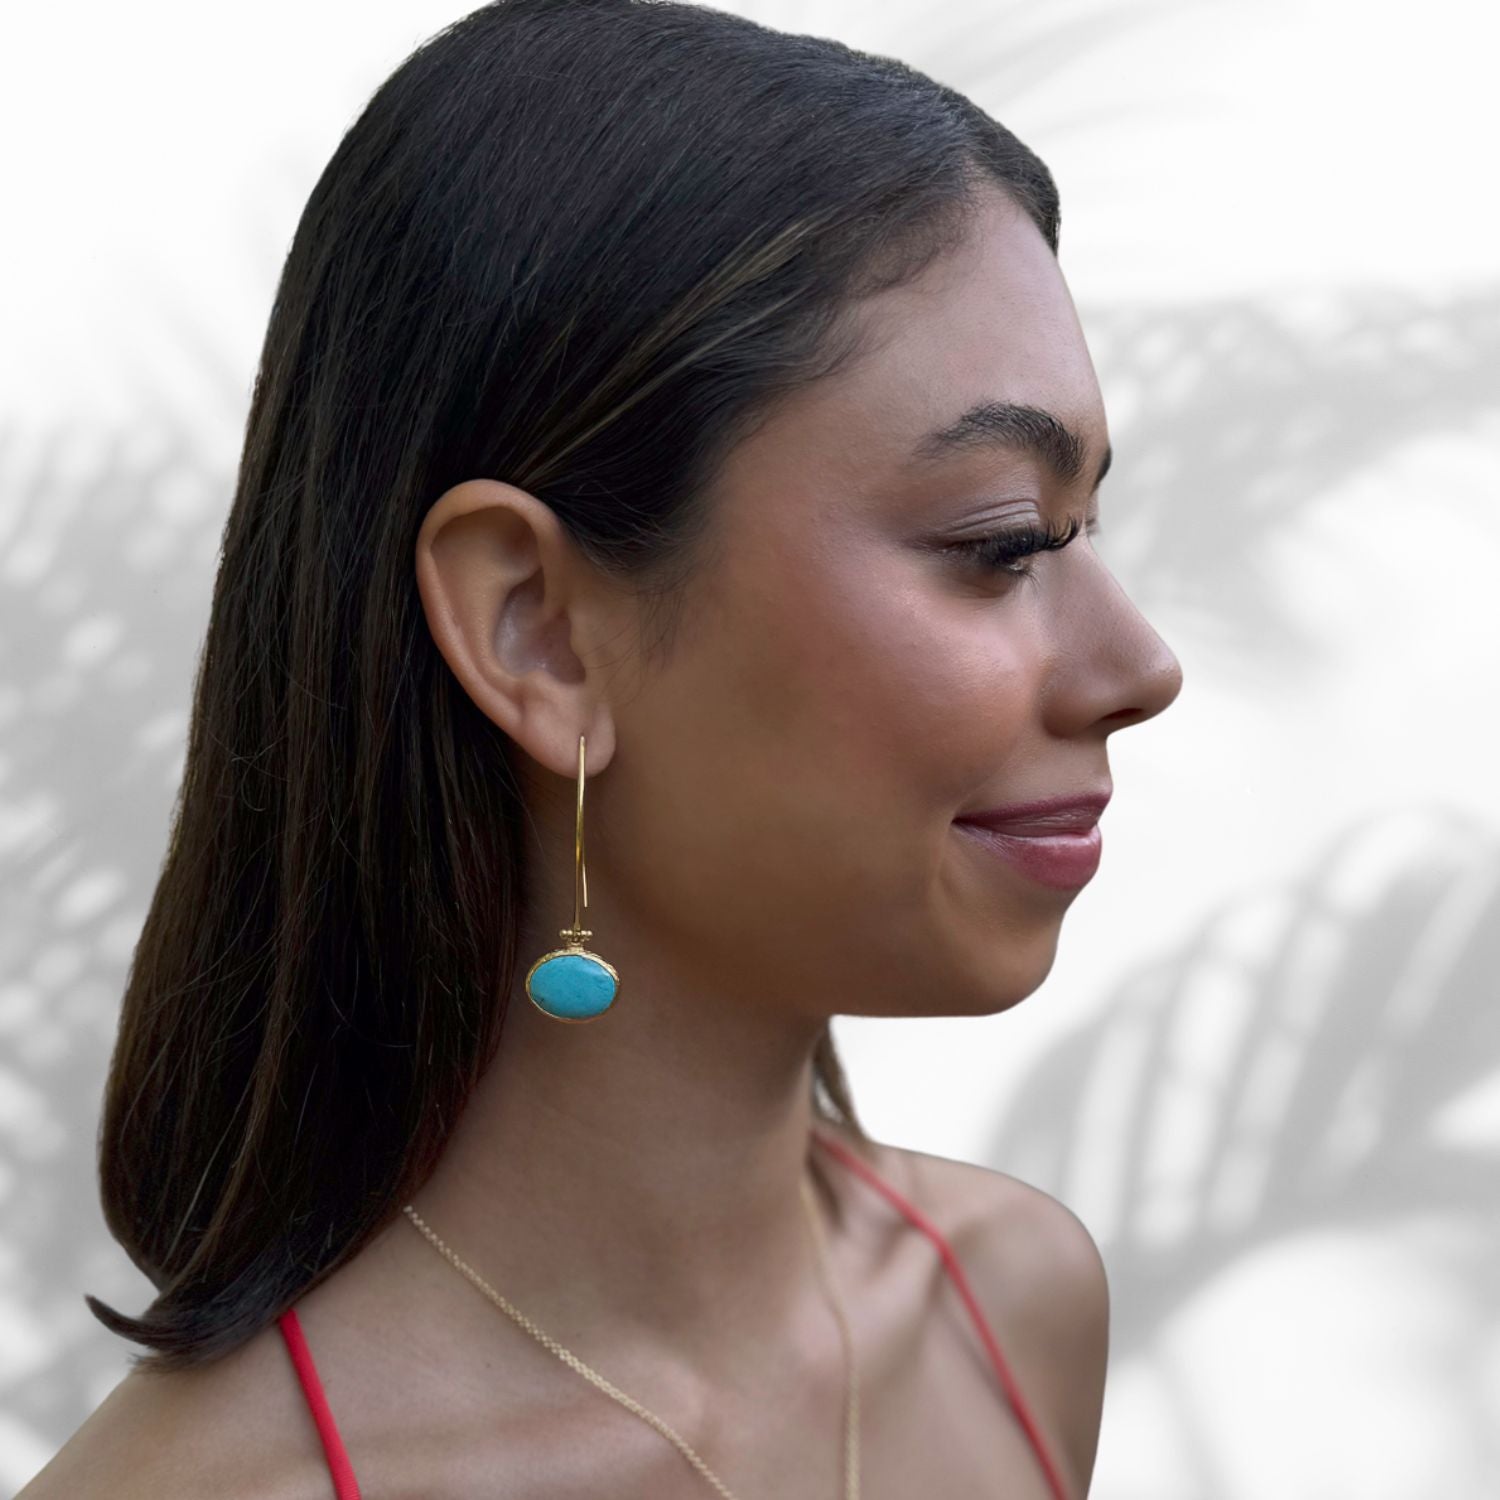 Model Wearing Handmade Turquoise Earrings with Gold-Plated Brass